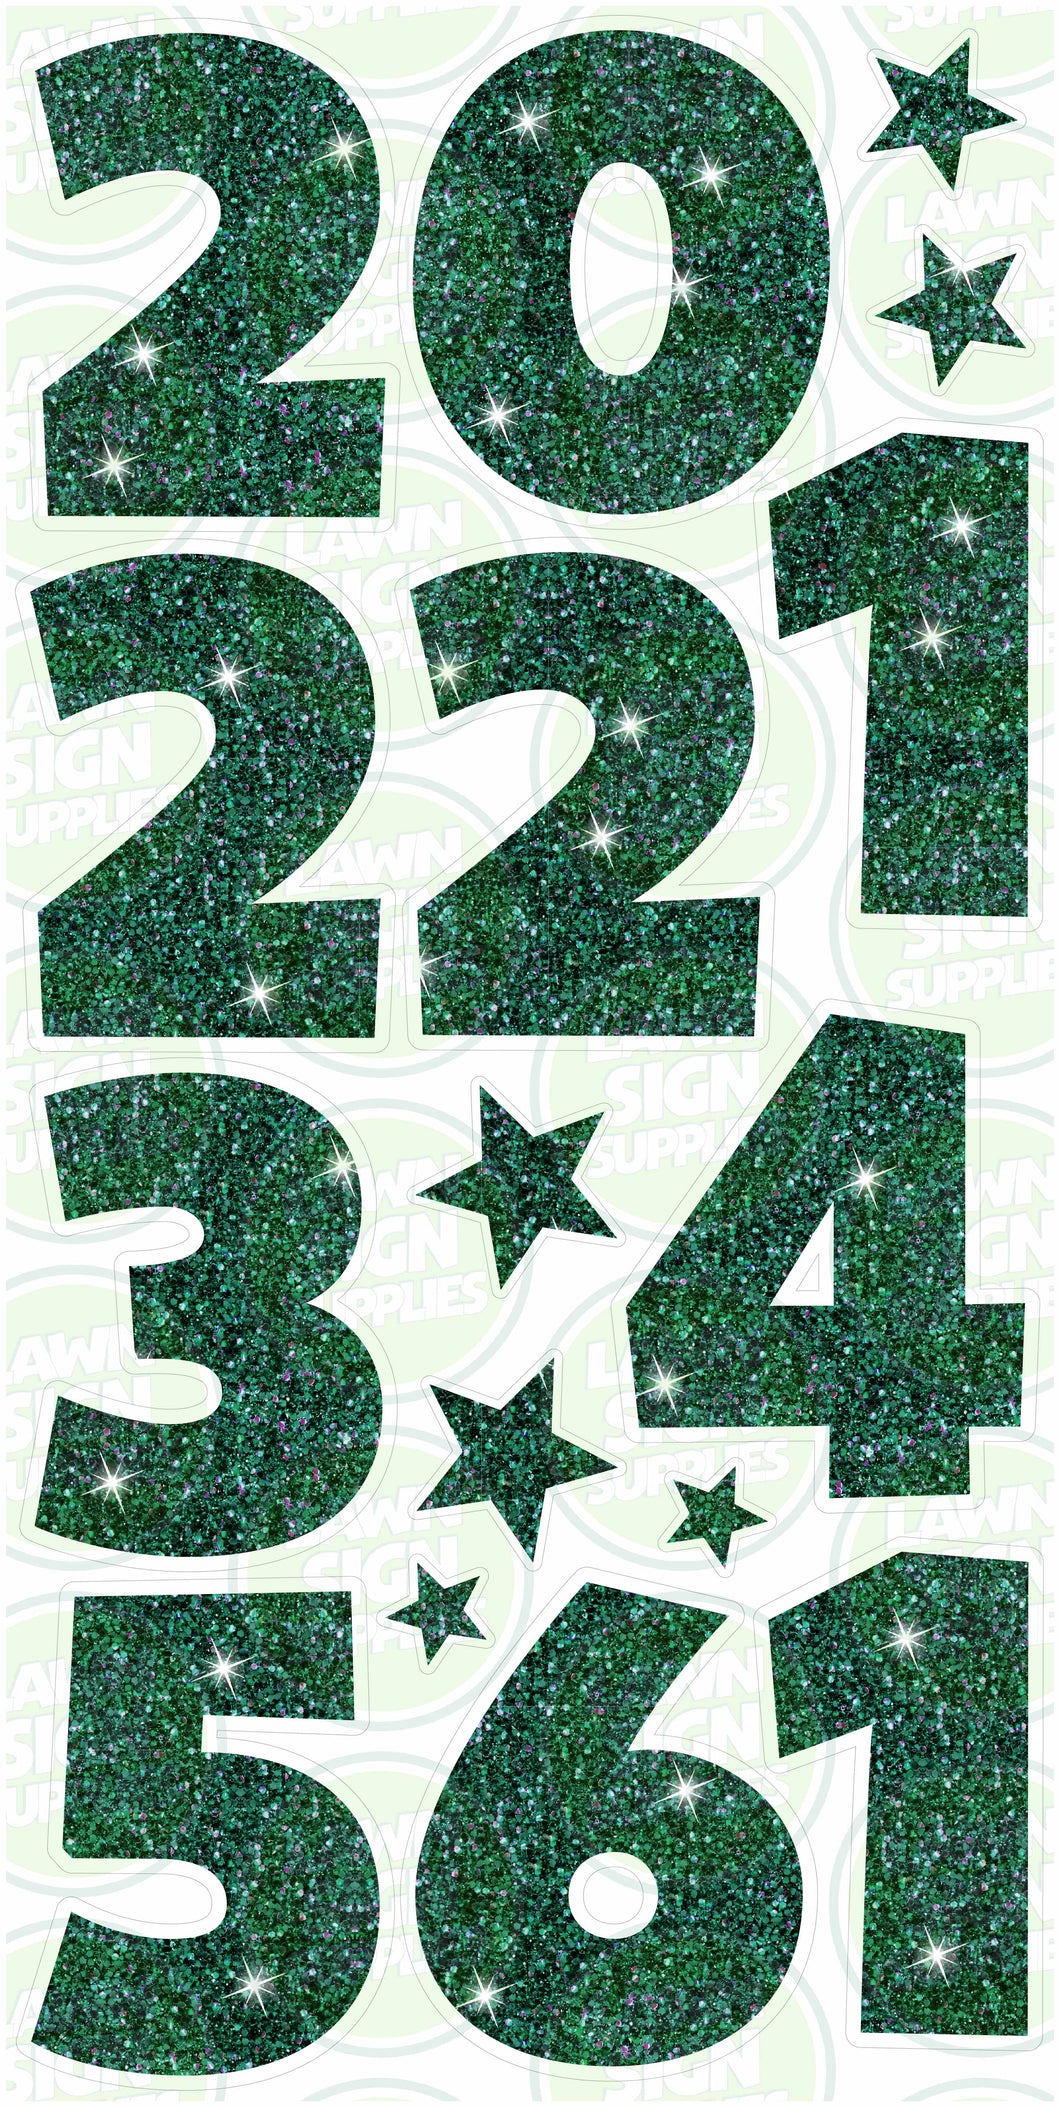 NUMBERS (60CM) - EVERGREEN SPARKLE